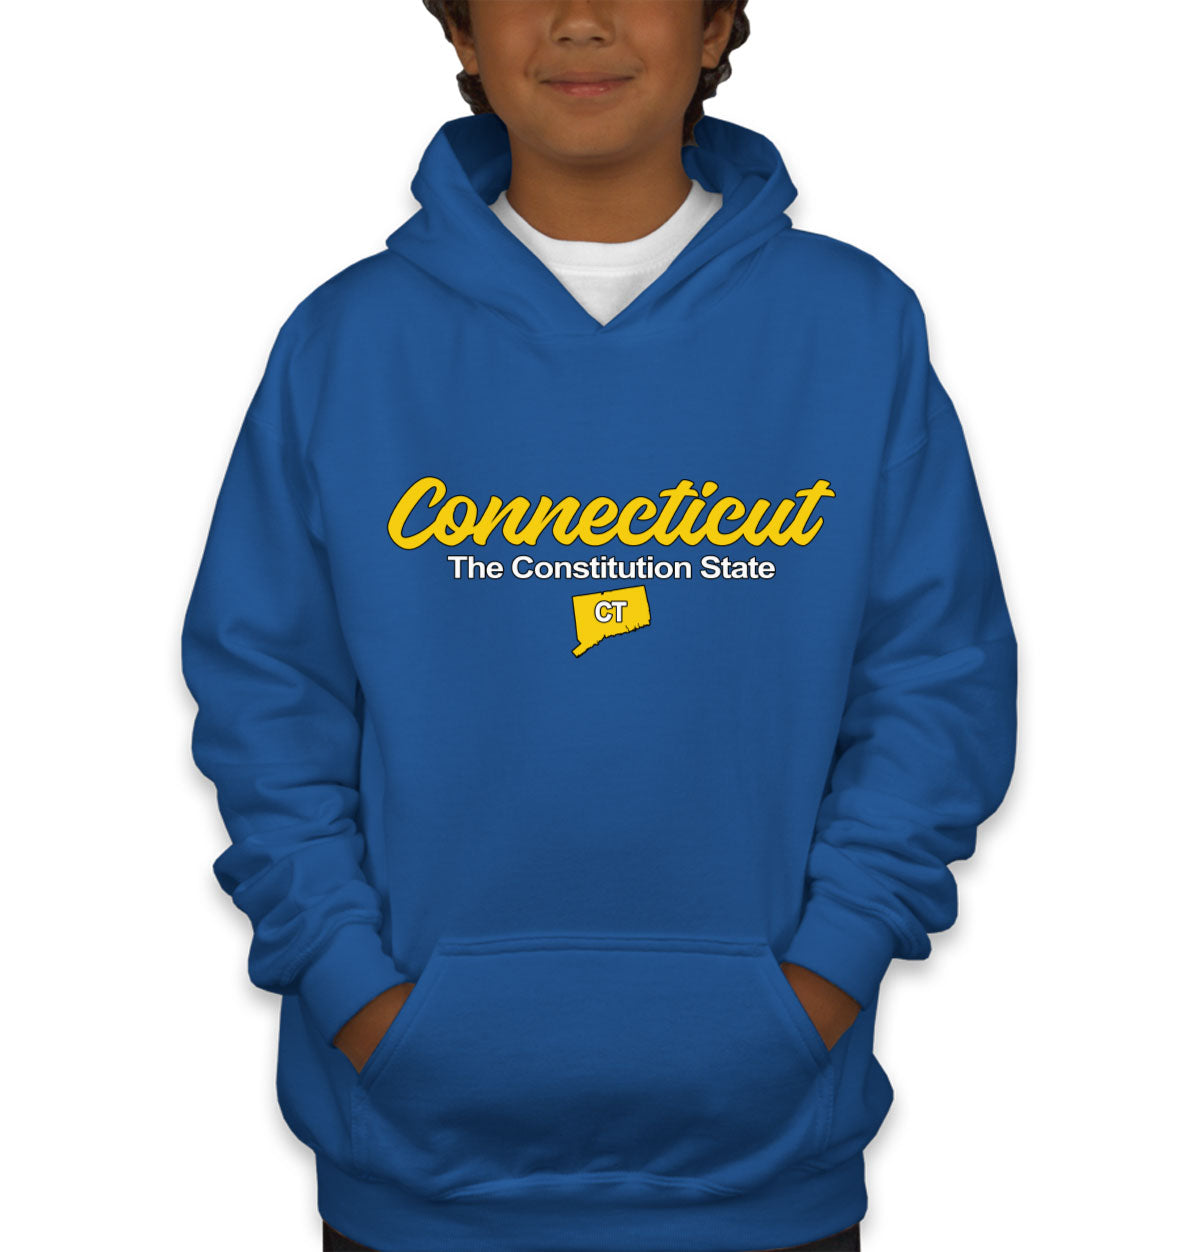 Connecticut The Constitution State Youth Hoodie